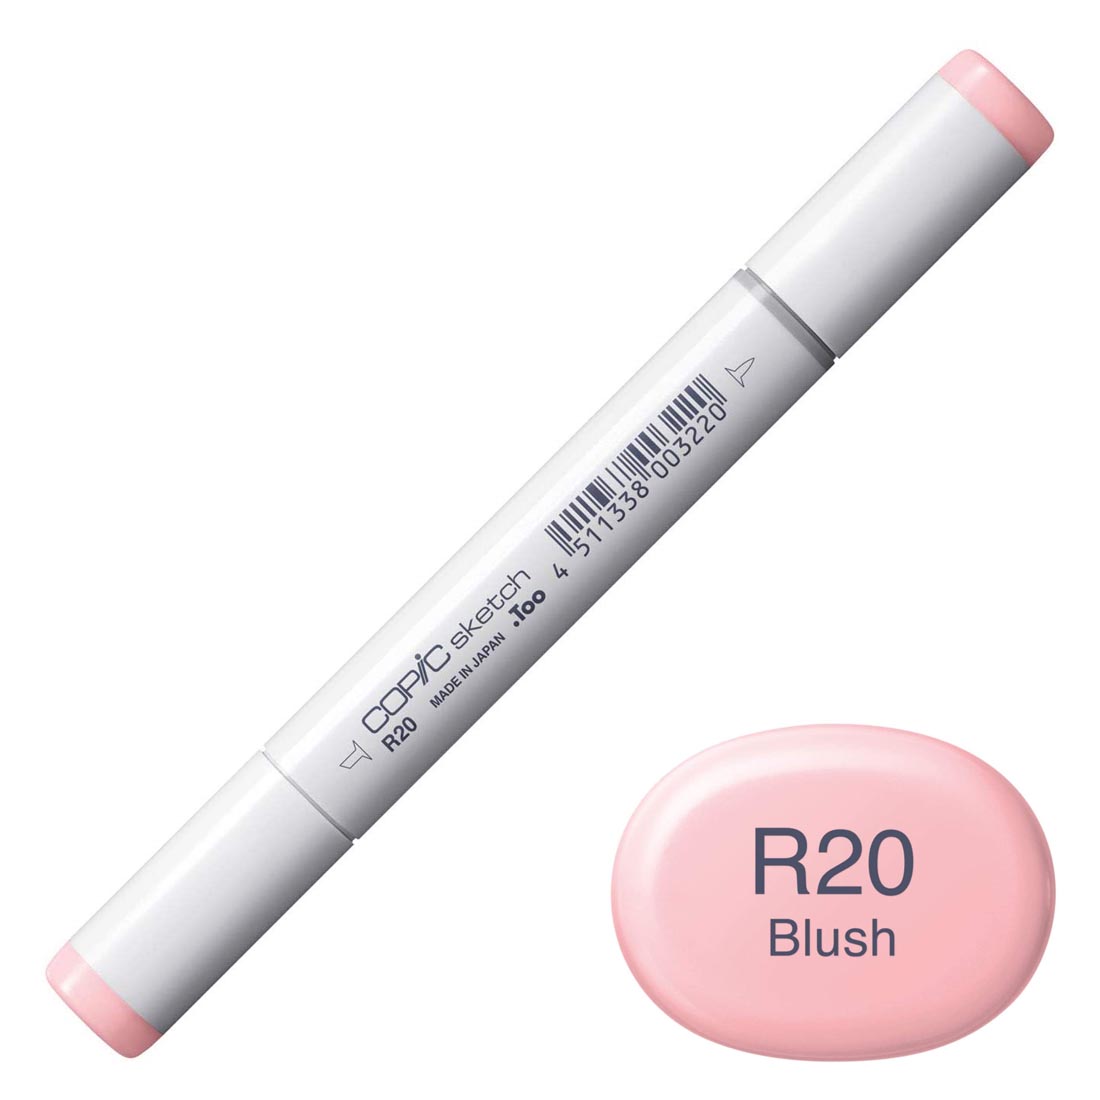 COPIC Sketch Marker with a color swatch and text of R20 Blush